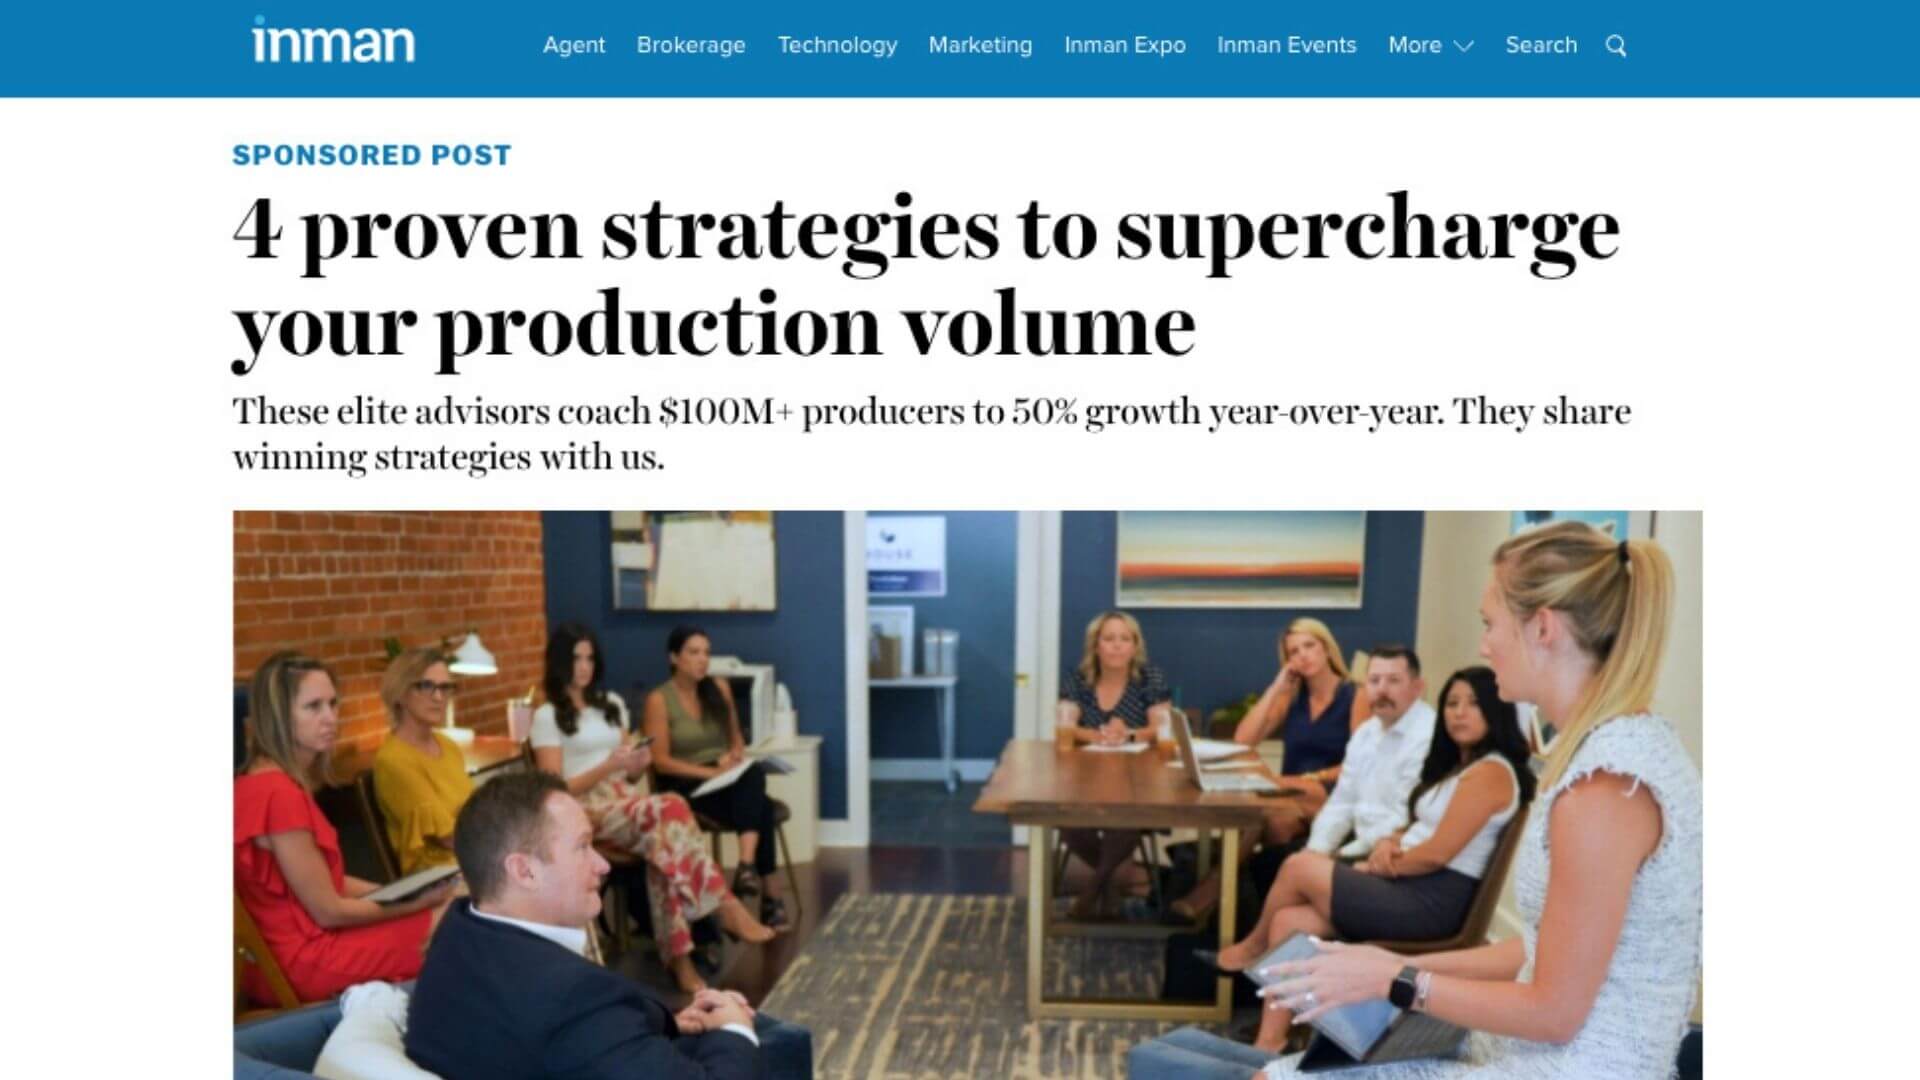 4 proven strategies to supercharge your production volume